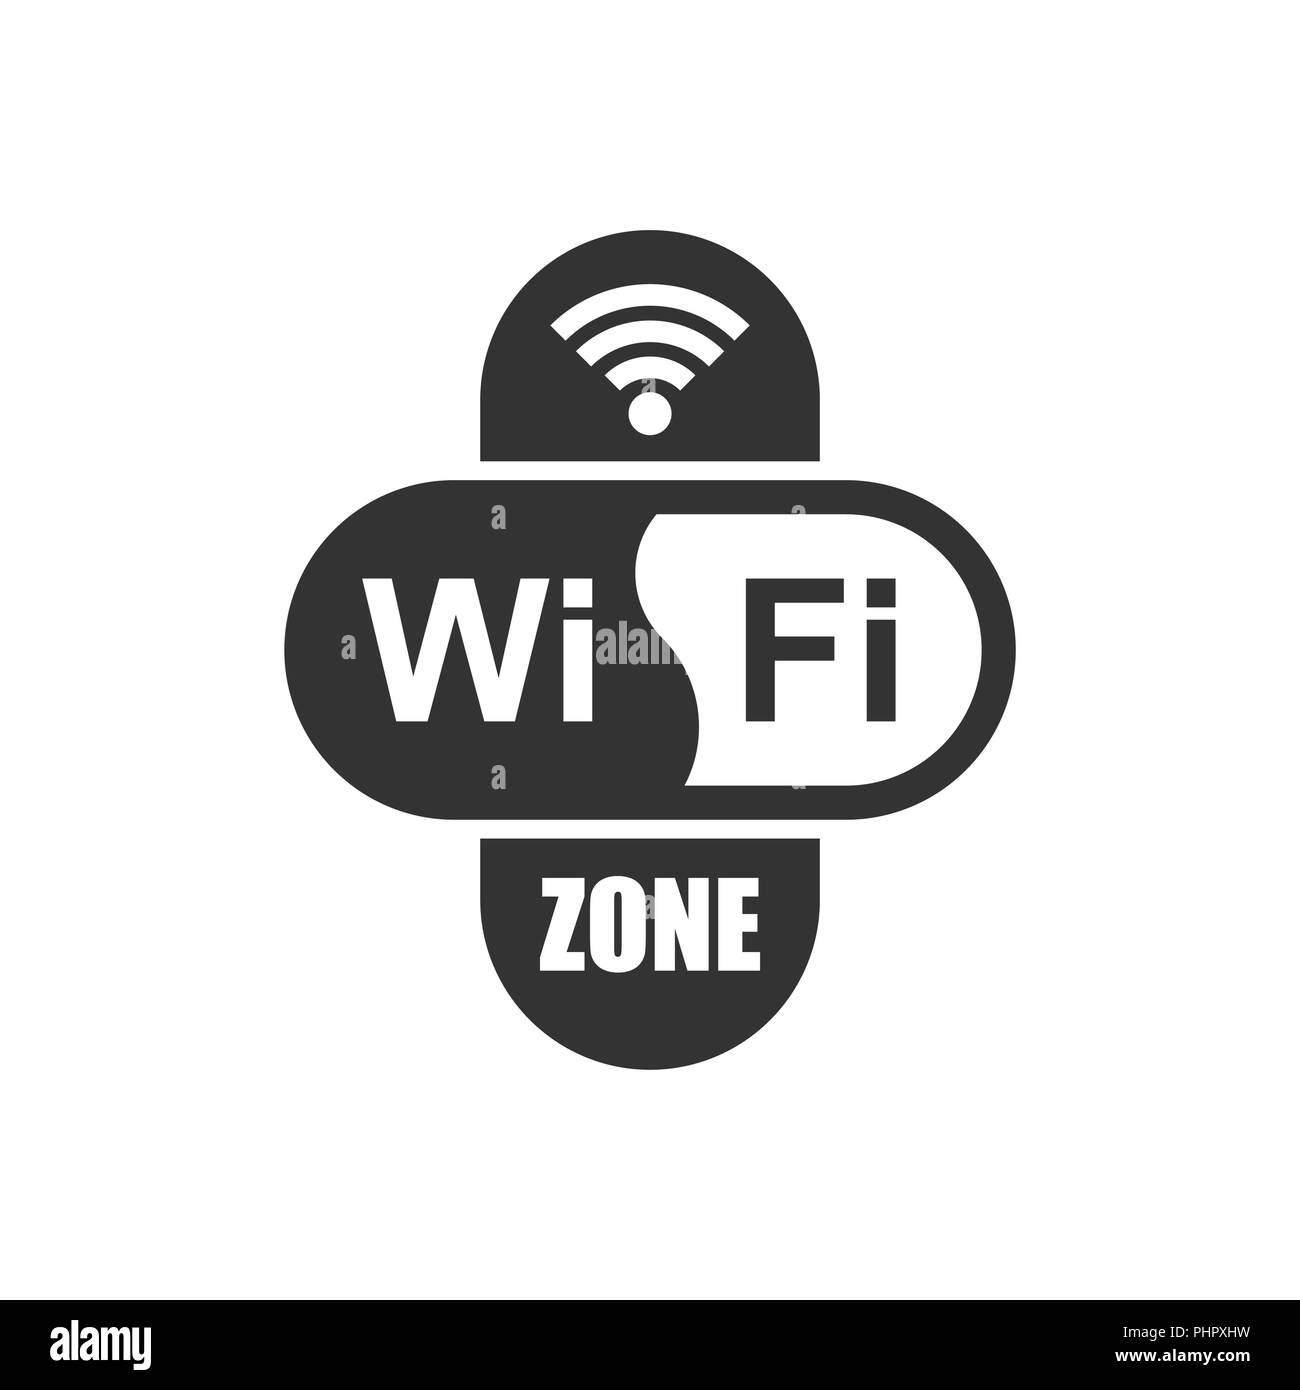 Wifi zone internet sign icon in flat style. Wi-fi wireless technology vector illustration on white isolated background. Network wifi zone business con Stock Vector